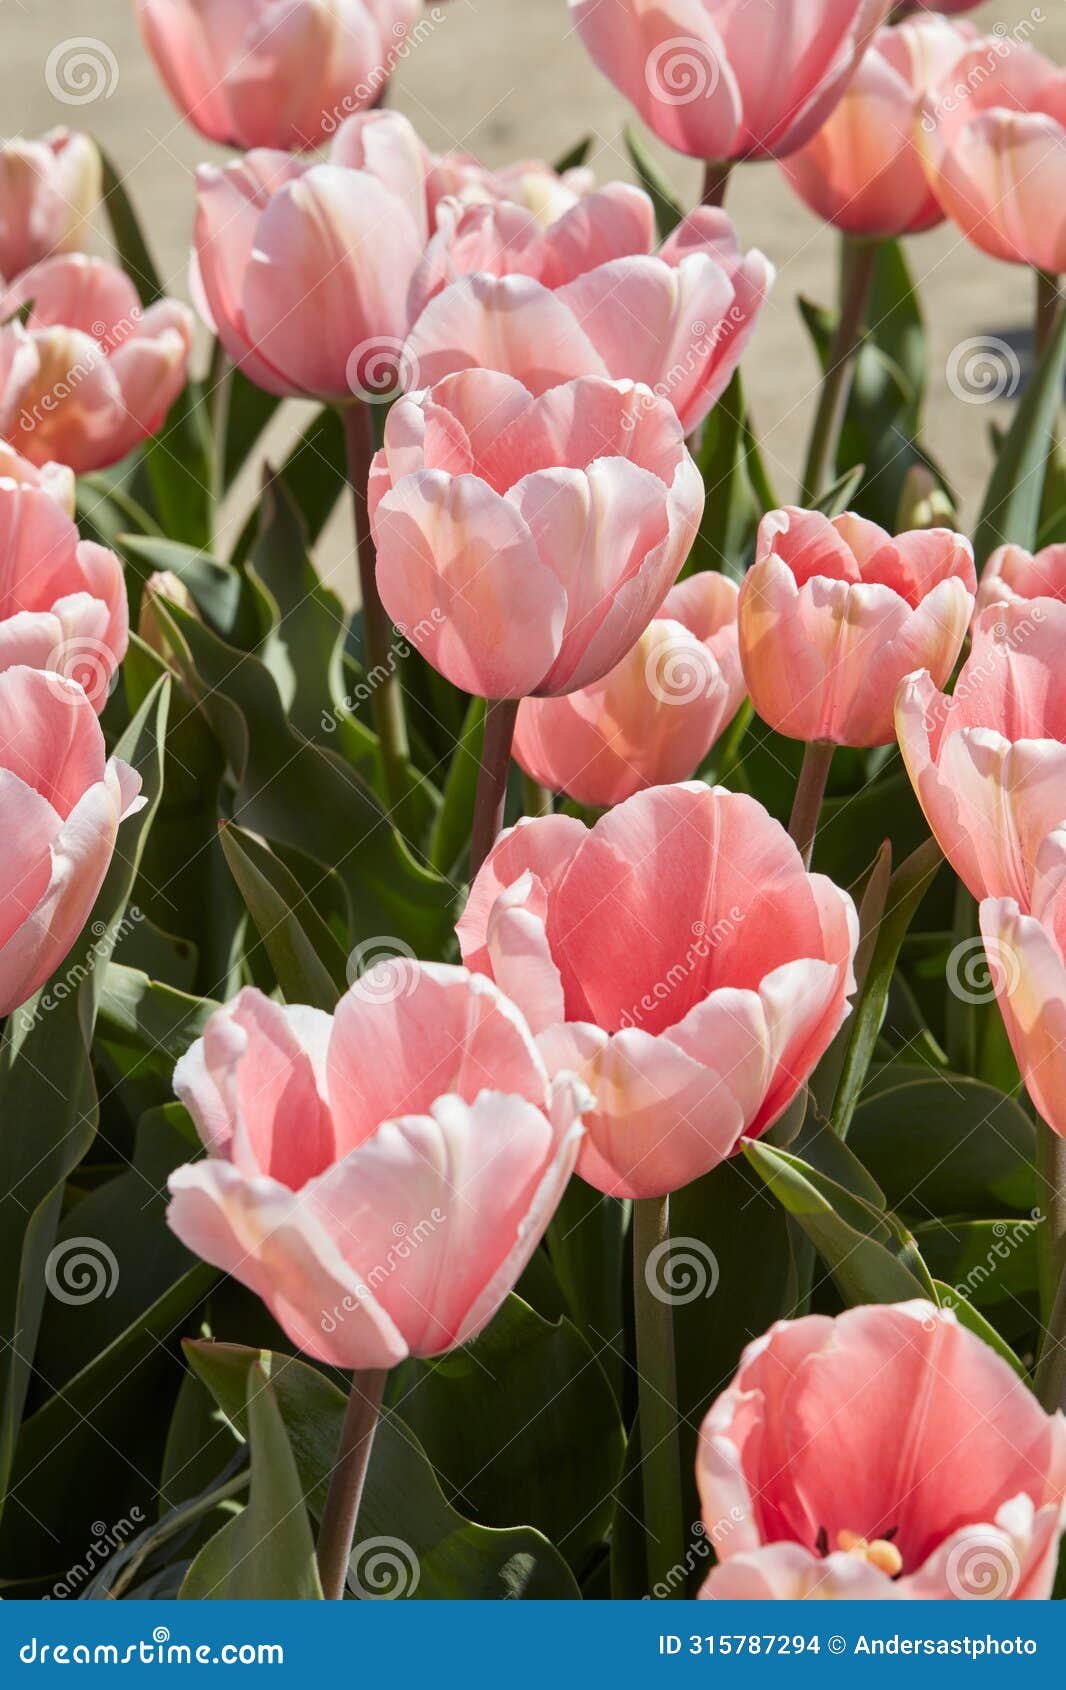 tulip salmon impression, pink flowers in spring